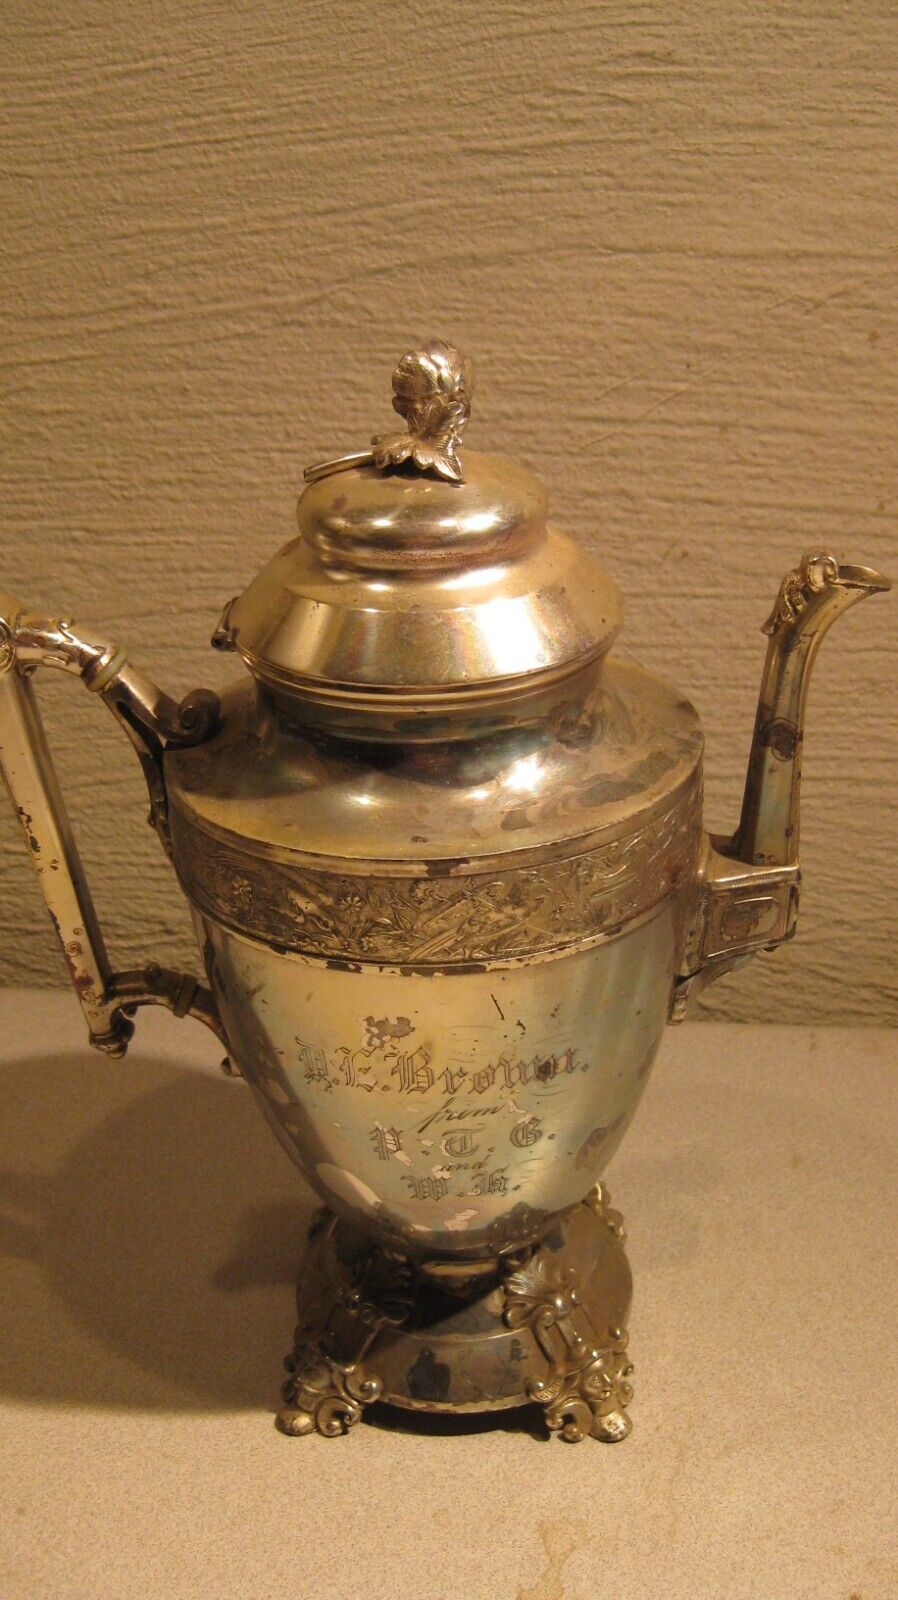 Exquisite Aesthetic Movement Silverplated Tea Pot~Simpson, Hall, Miller & Co